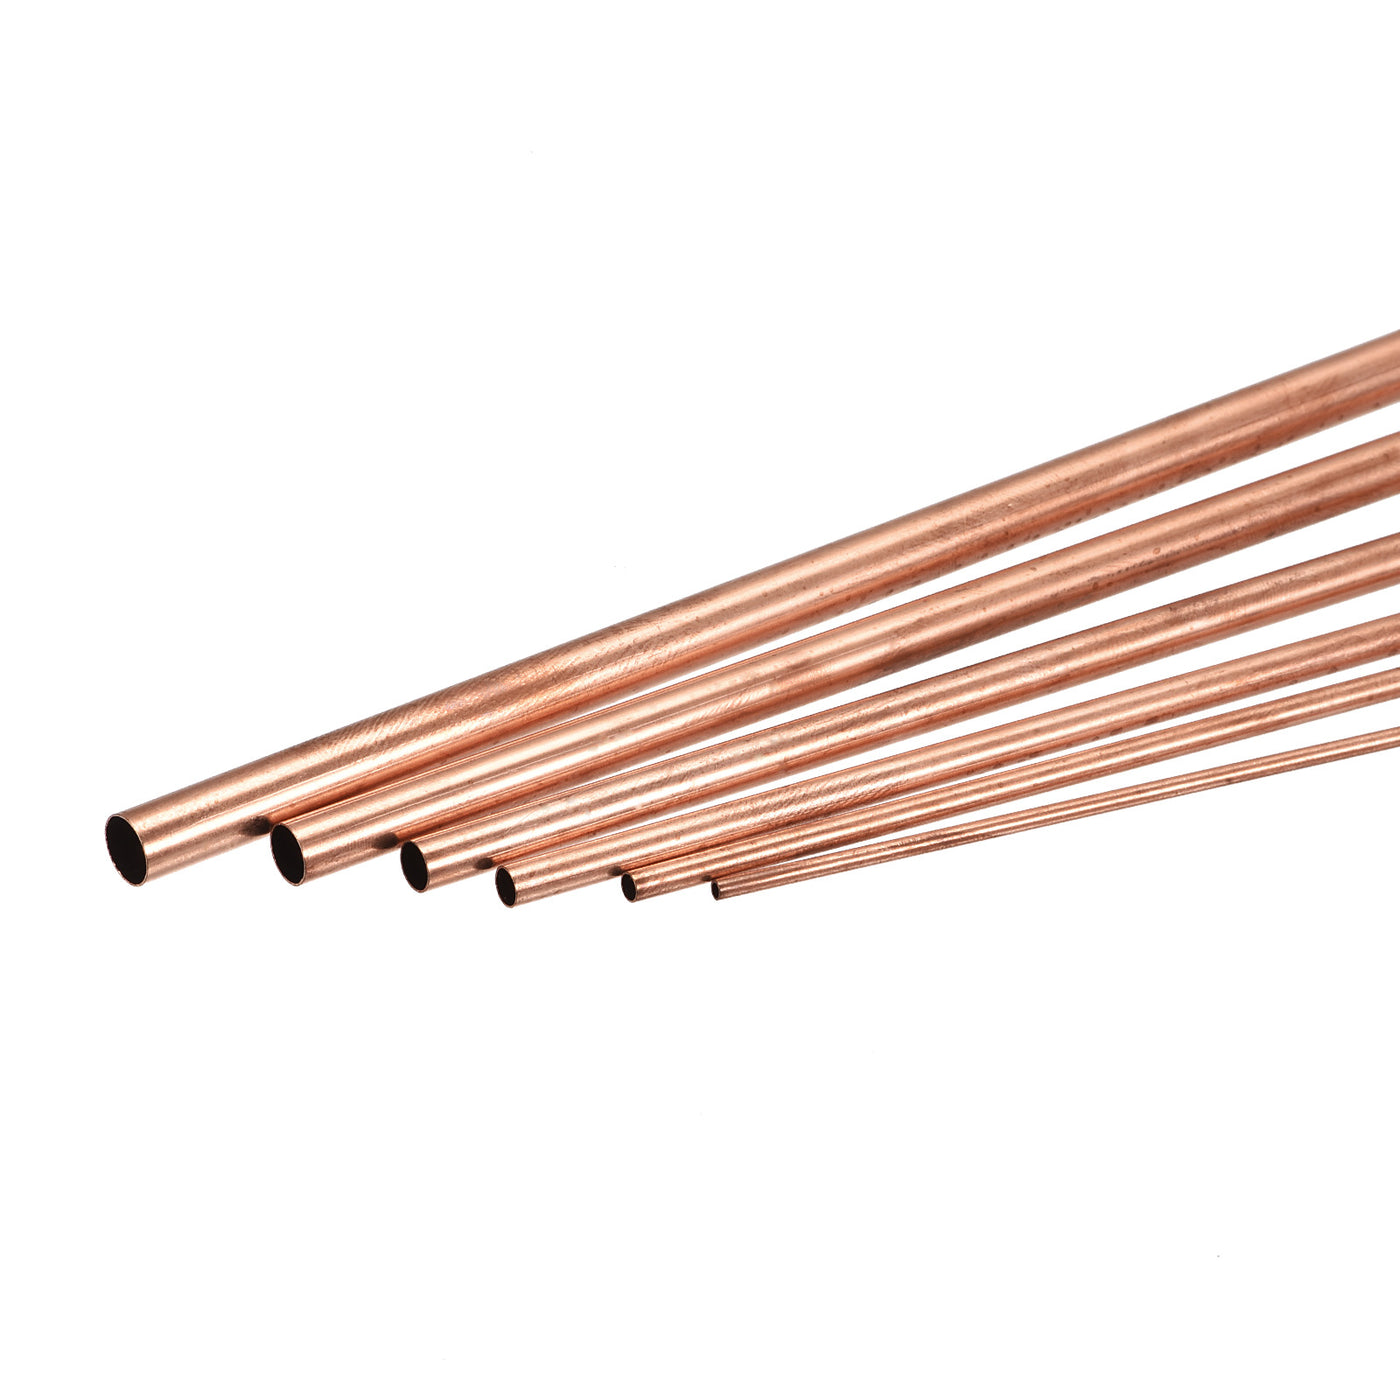 Uxcell Uxcell Copper Tube, 2mm 3mm 4mm 5mm 6mm 7mm OD x 0.5mm Wall Thickness 200mm Length Metal Tubing, Pack of 6